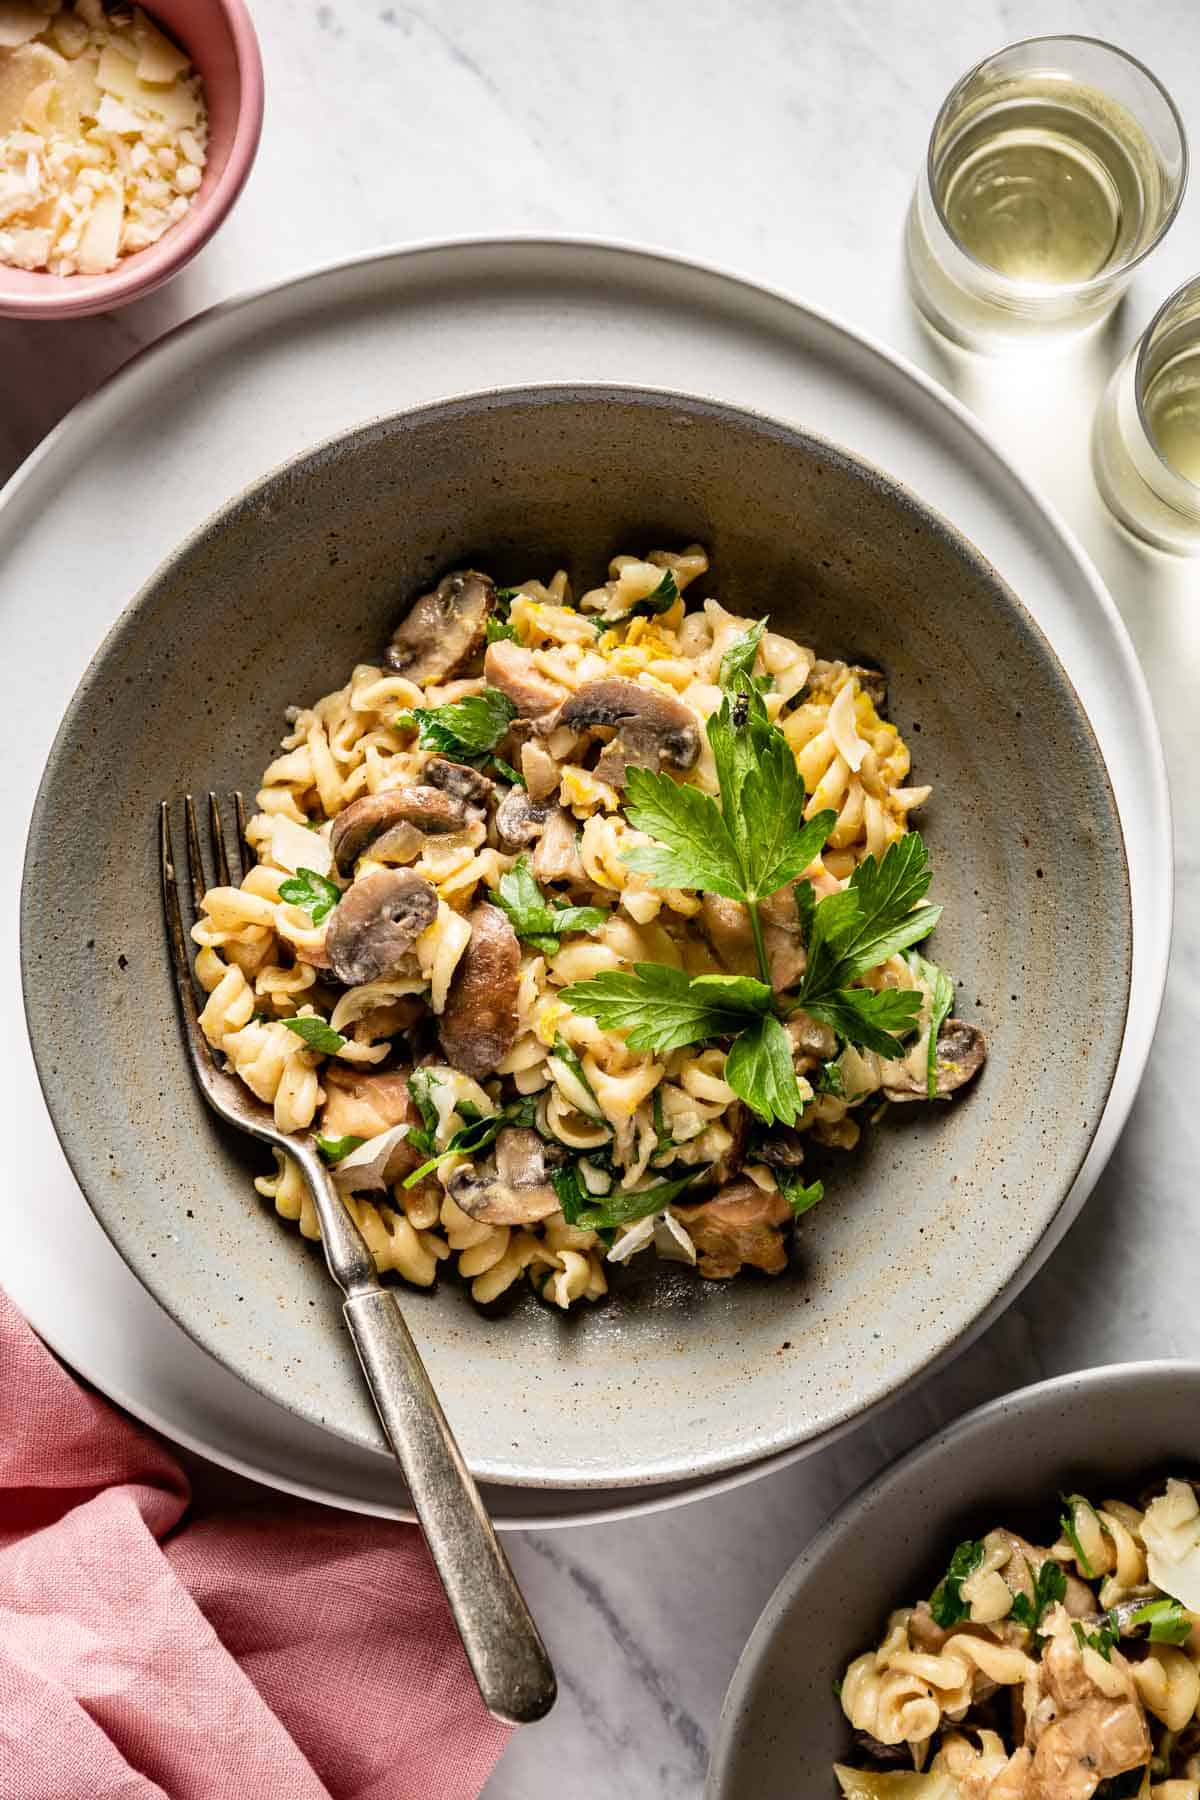 A bowl of this chicken and mushroom recipe garnished with parsley with a fork in the dish.